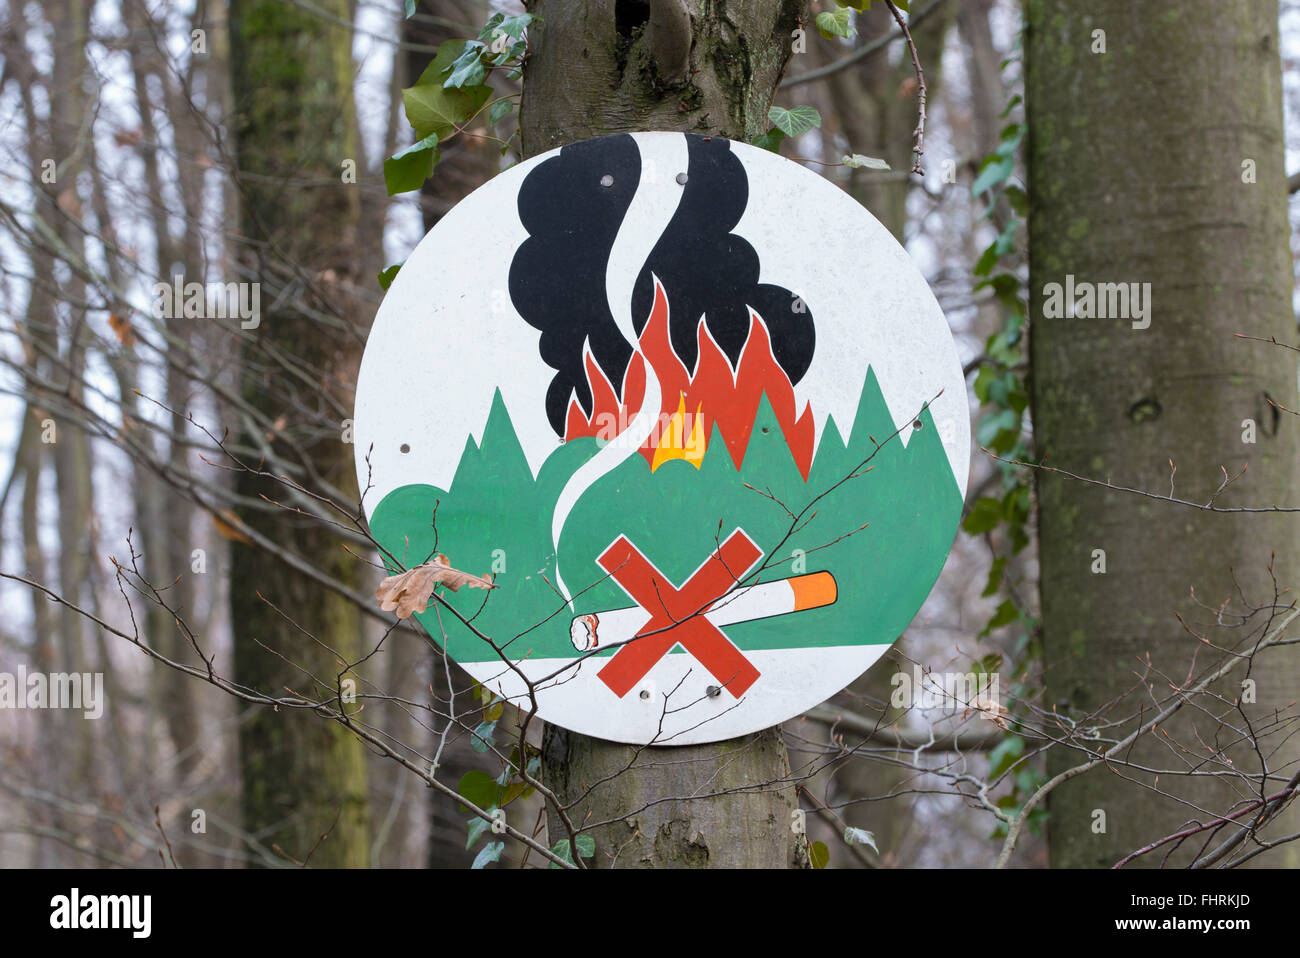 No smoking in the forest, fire danger warning sign on a tree, Hesse, Germany Stock Photo